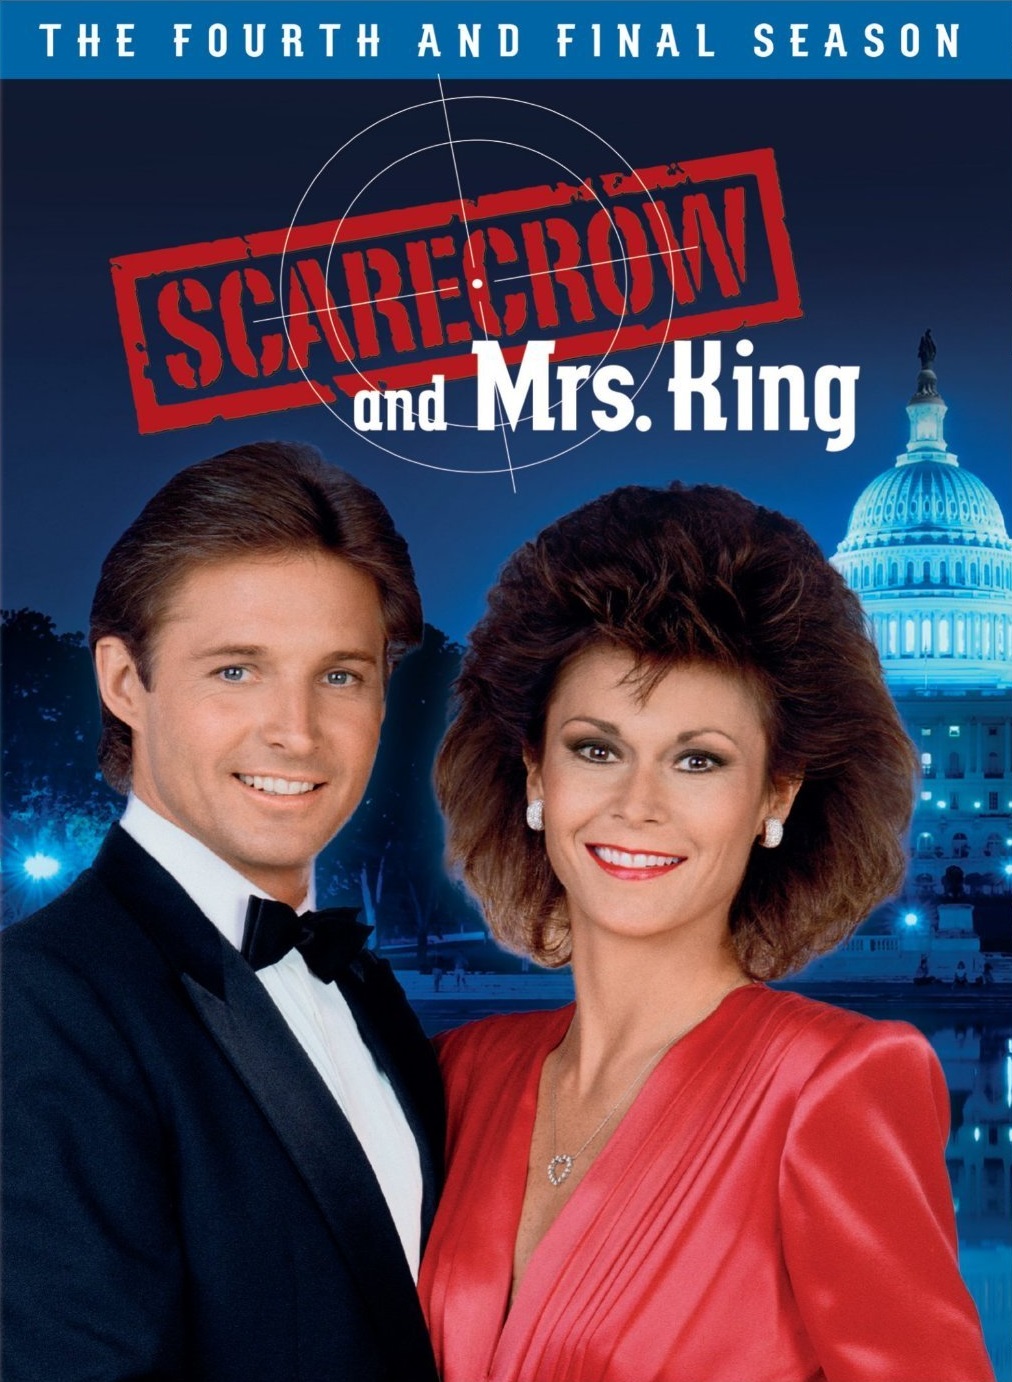 Top secret – Scarecrow and Mrs. King